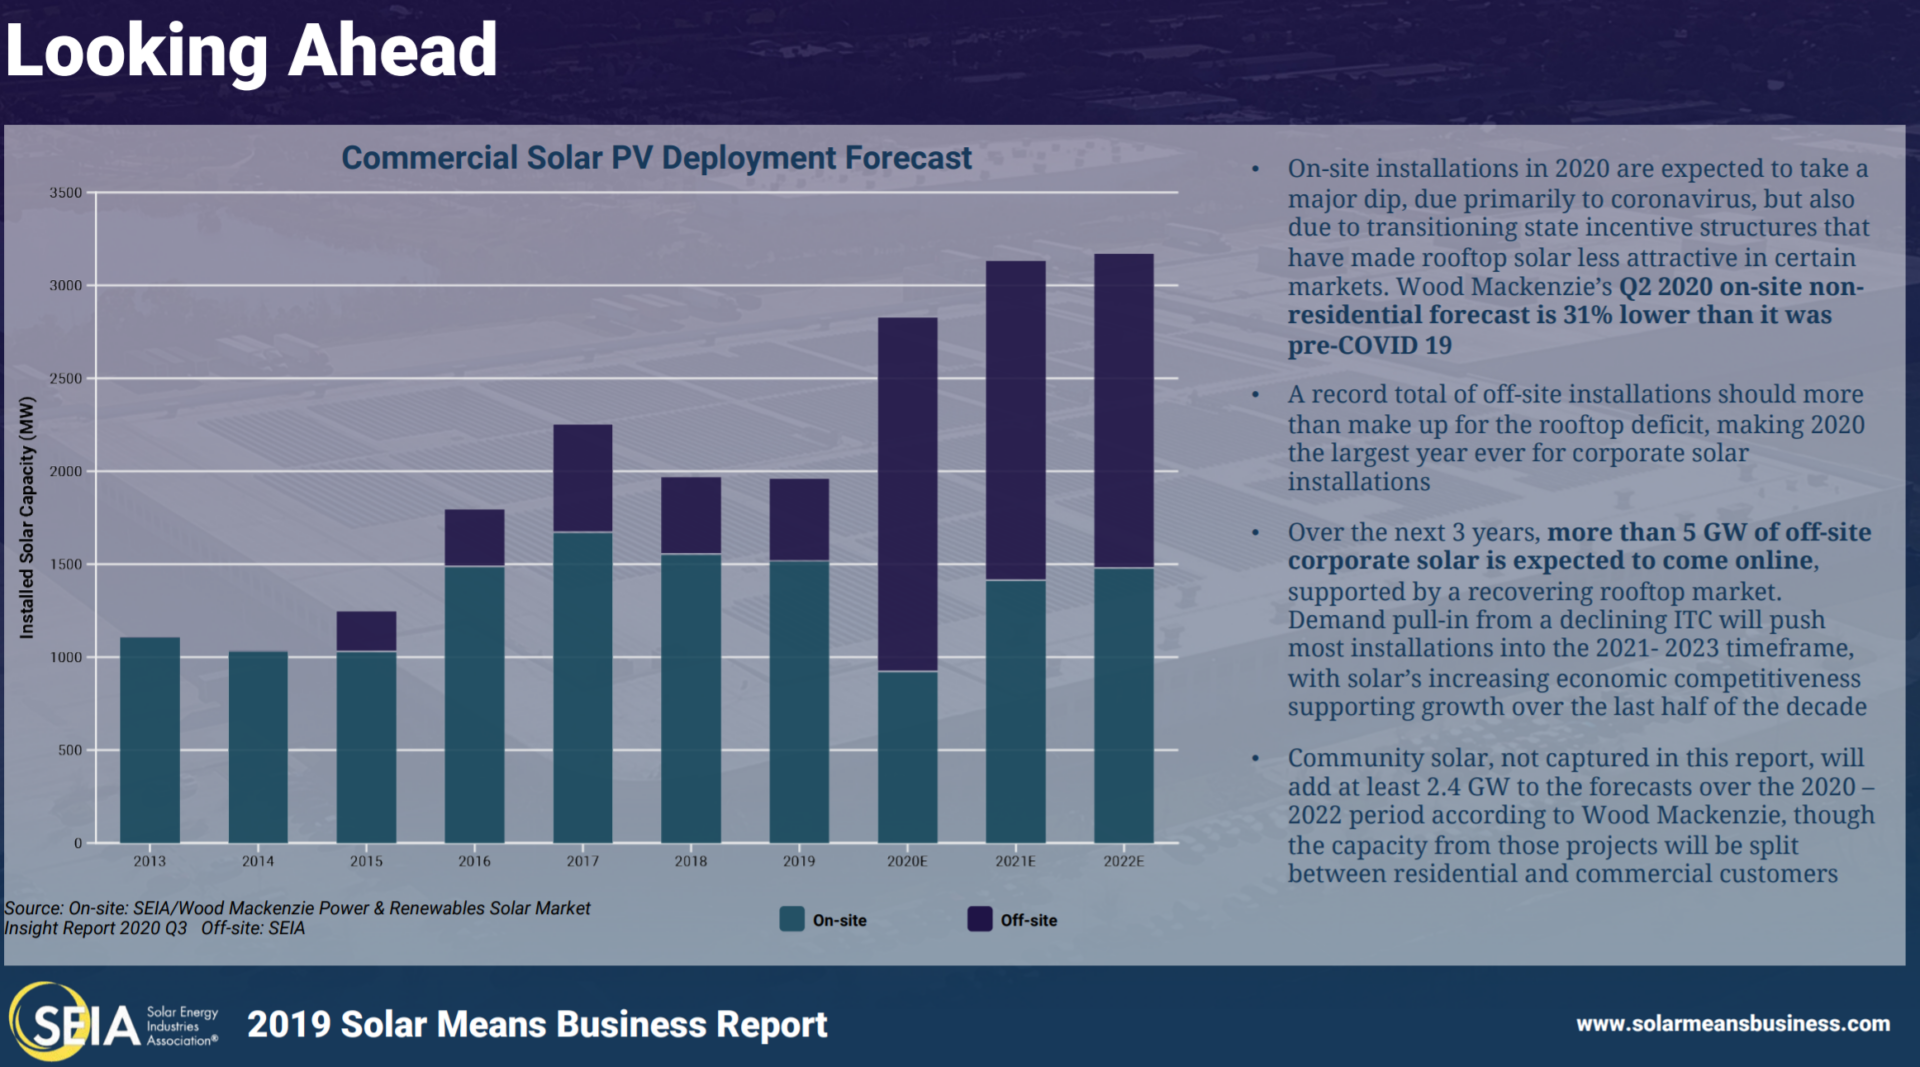 Commercial Solar PV Deployment Forecast Showing tripling of production from 2013 to (projected) 2022